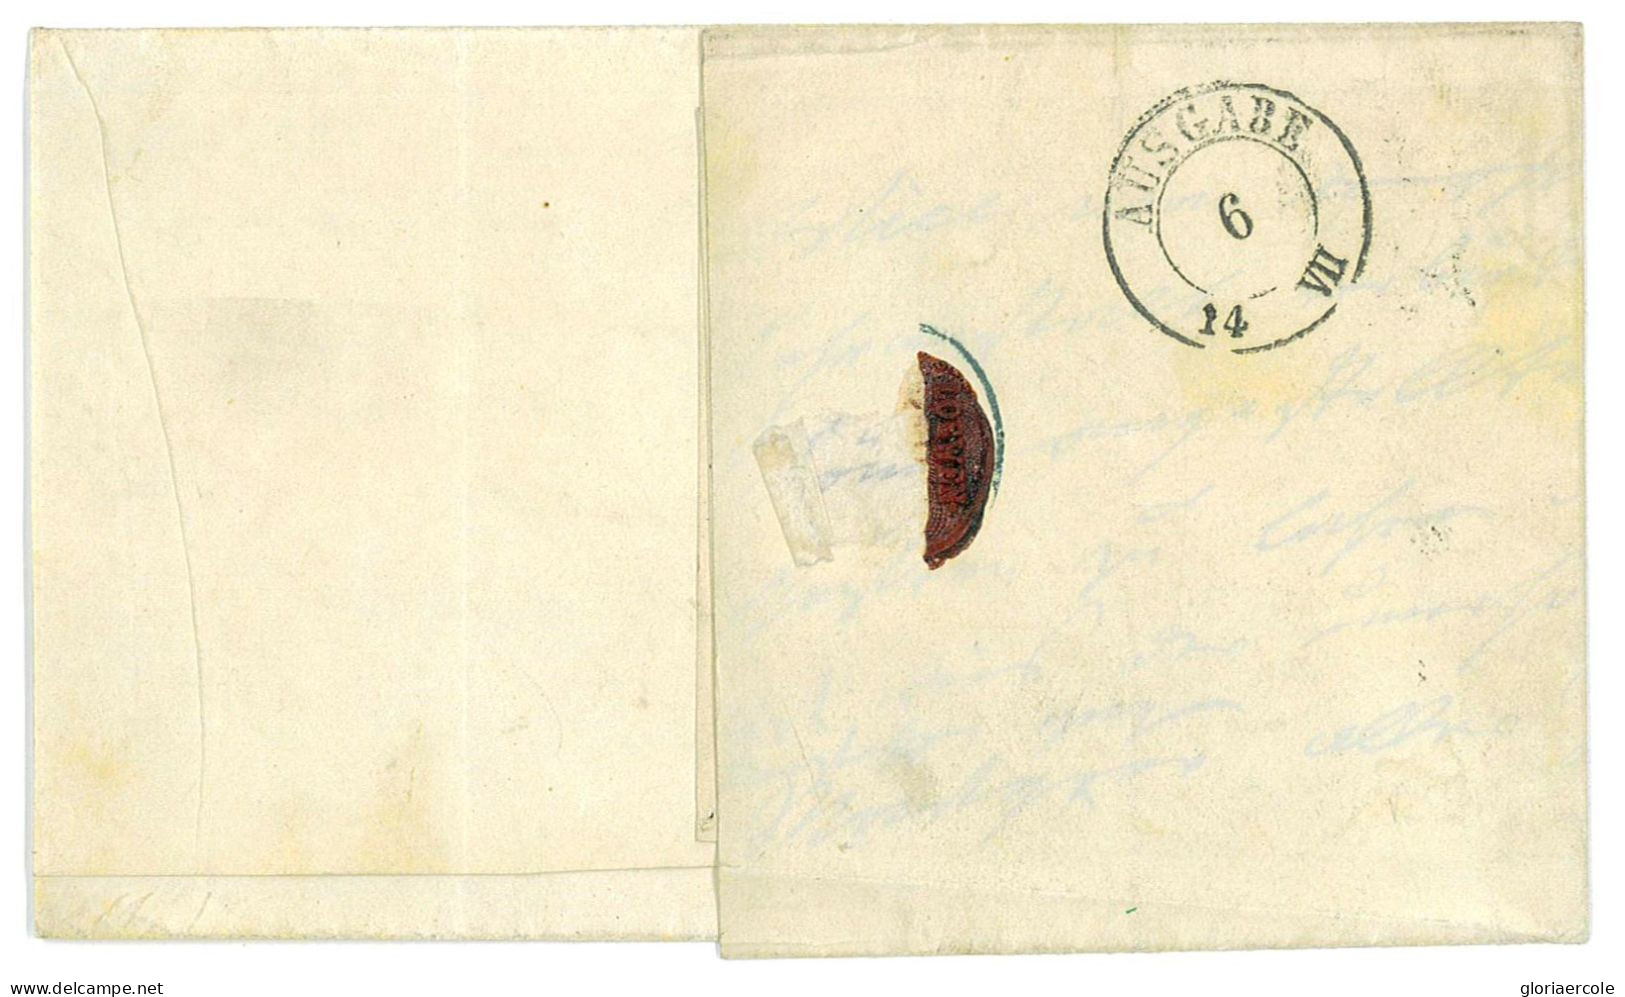 P2873 - SAXSEN, MICHEL NR. 9 ON FOLDED LETTER, LUXUS QUALITY FROM DRESDEN TO LEIPZIG, NUMERAL CANCEL NR. 1 - Brunswick